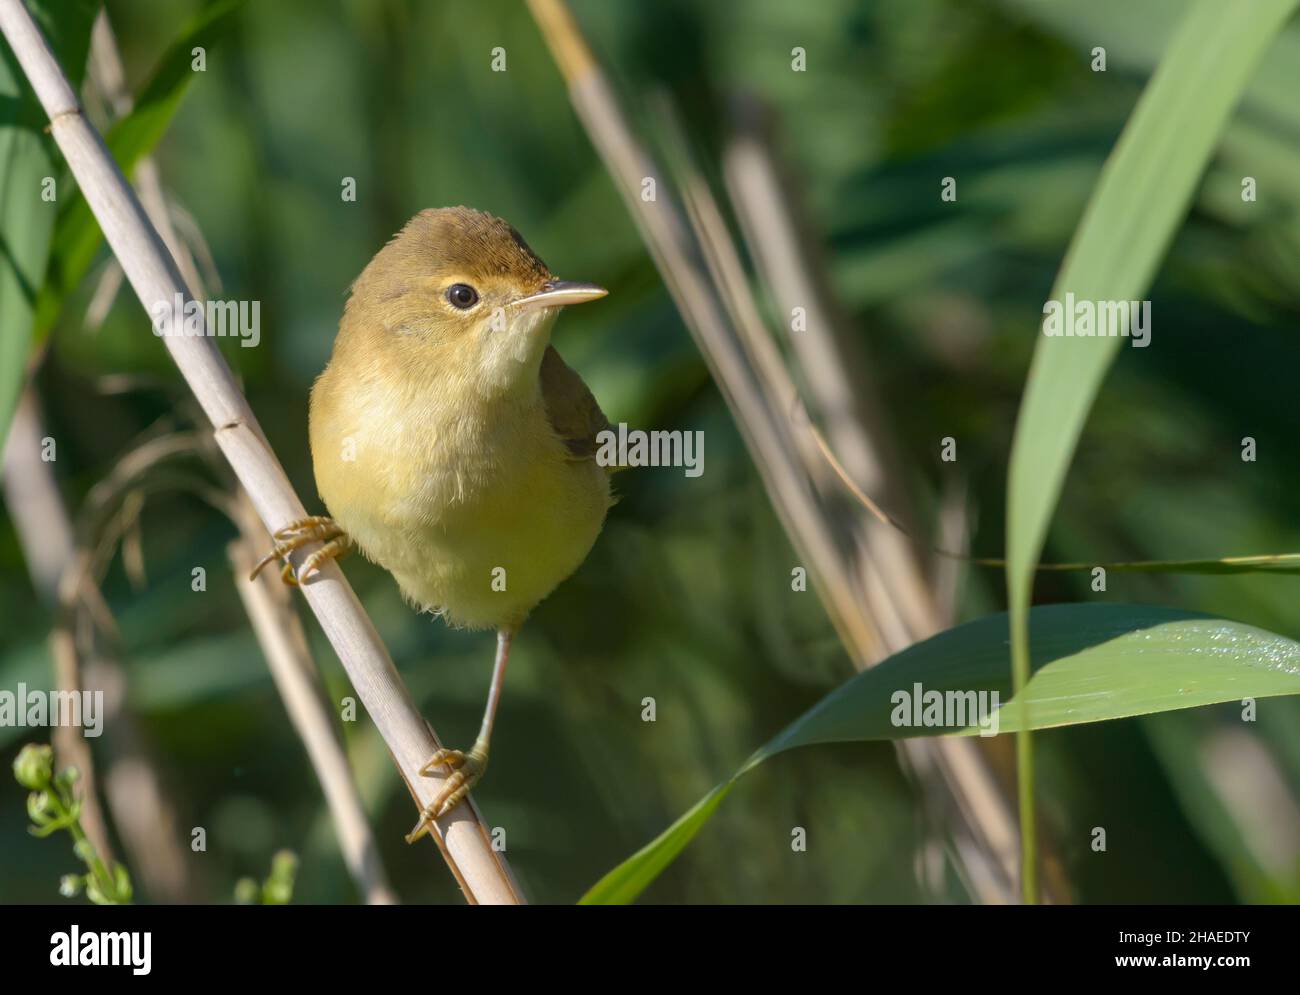 Young Marsh Warbler (Acrocephalus palustris) perched on reed stems in bushes Stock Photo